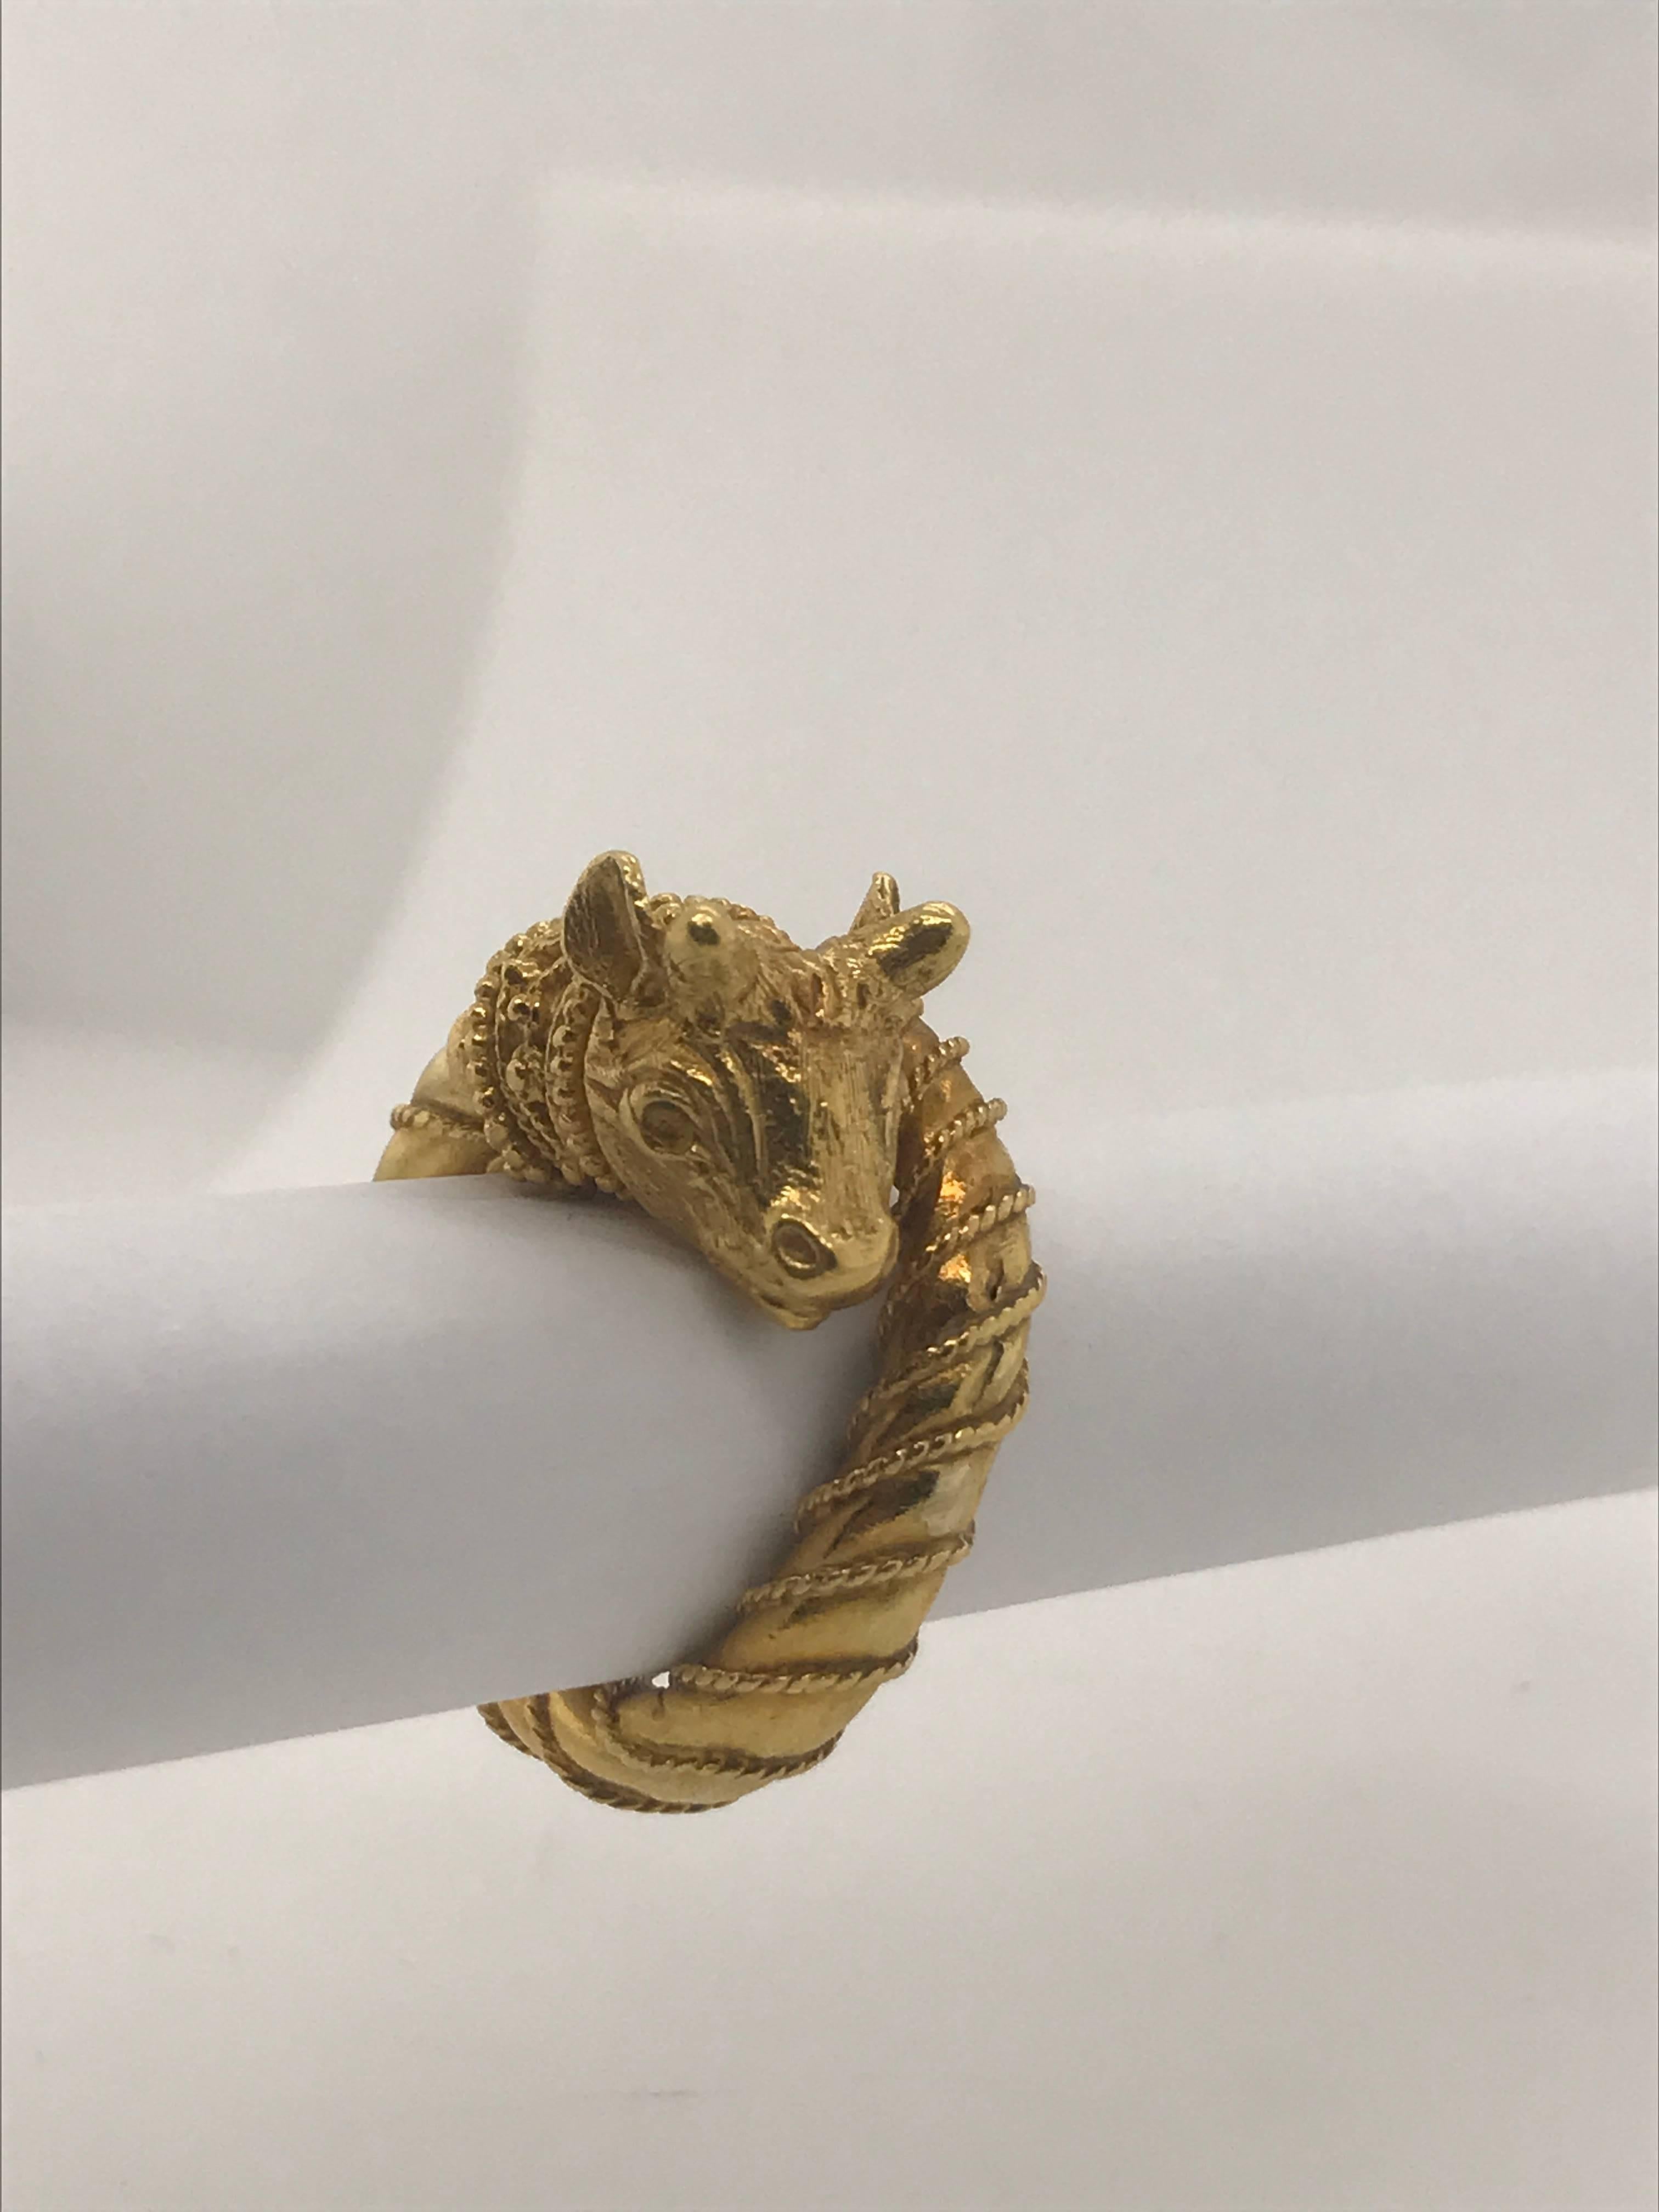 Ram's head decorative ring in 22K yellow gold Designed by Greek designer Zolotas. This ring likely cannot be sized as has a slightly 